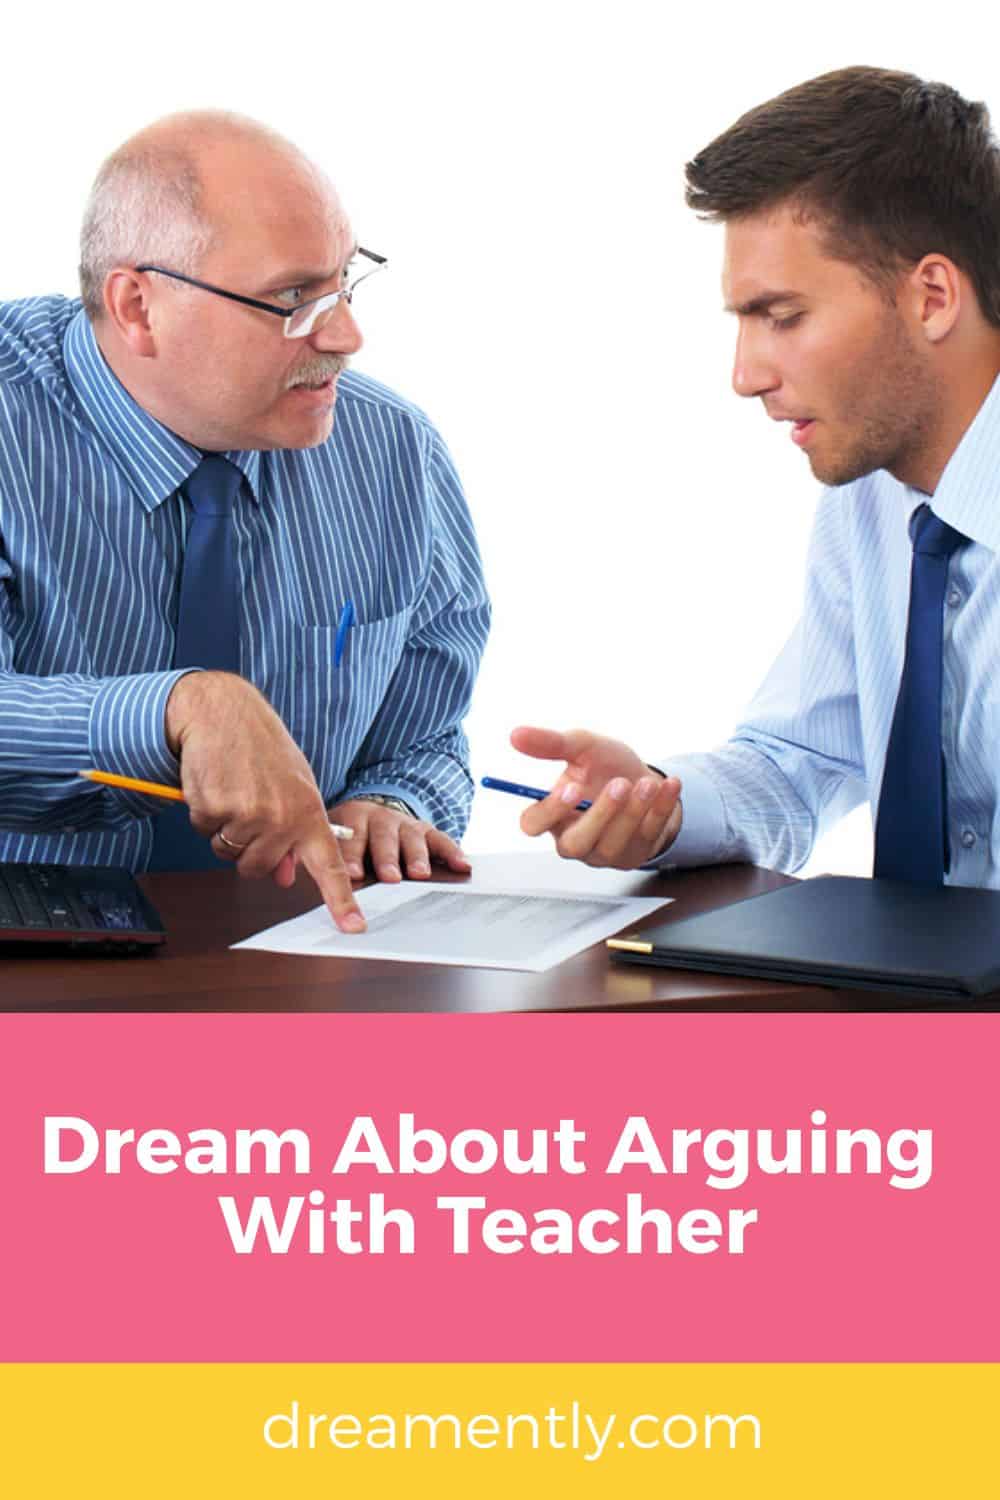 Dream About Arguing With Teacher